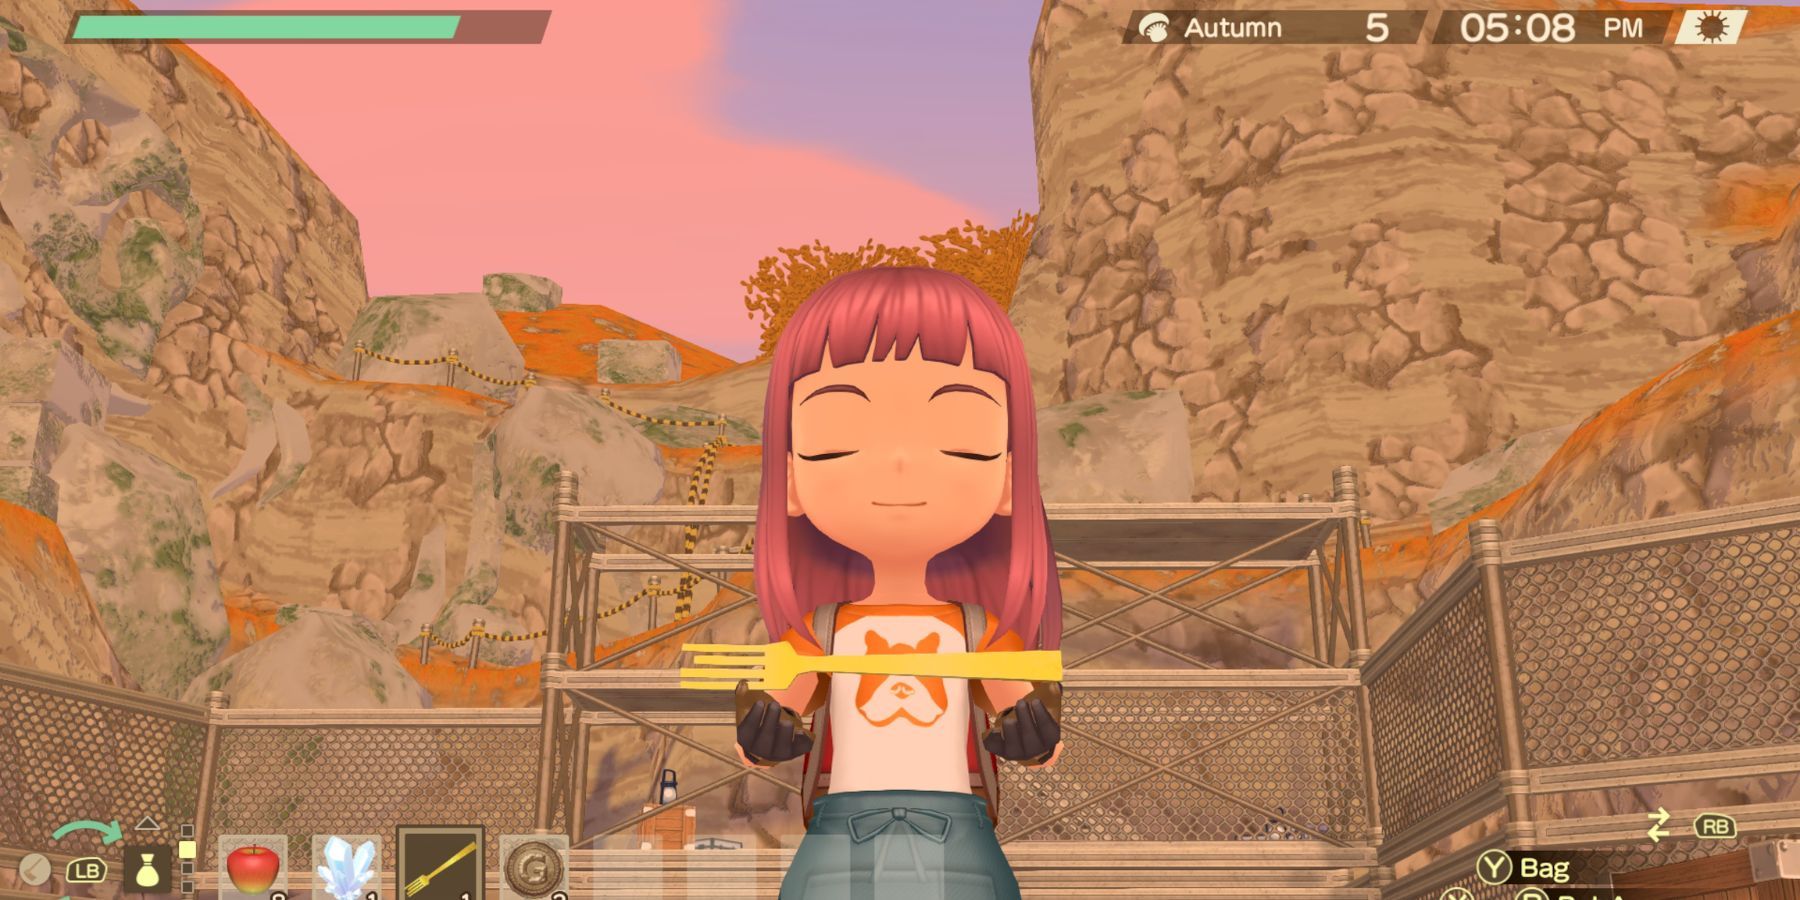 Story Of Seasons: A Wonderful Life Beginner Tips & Tricks - How To